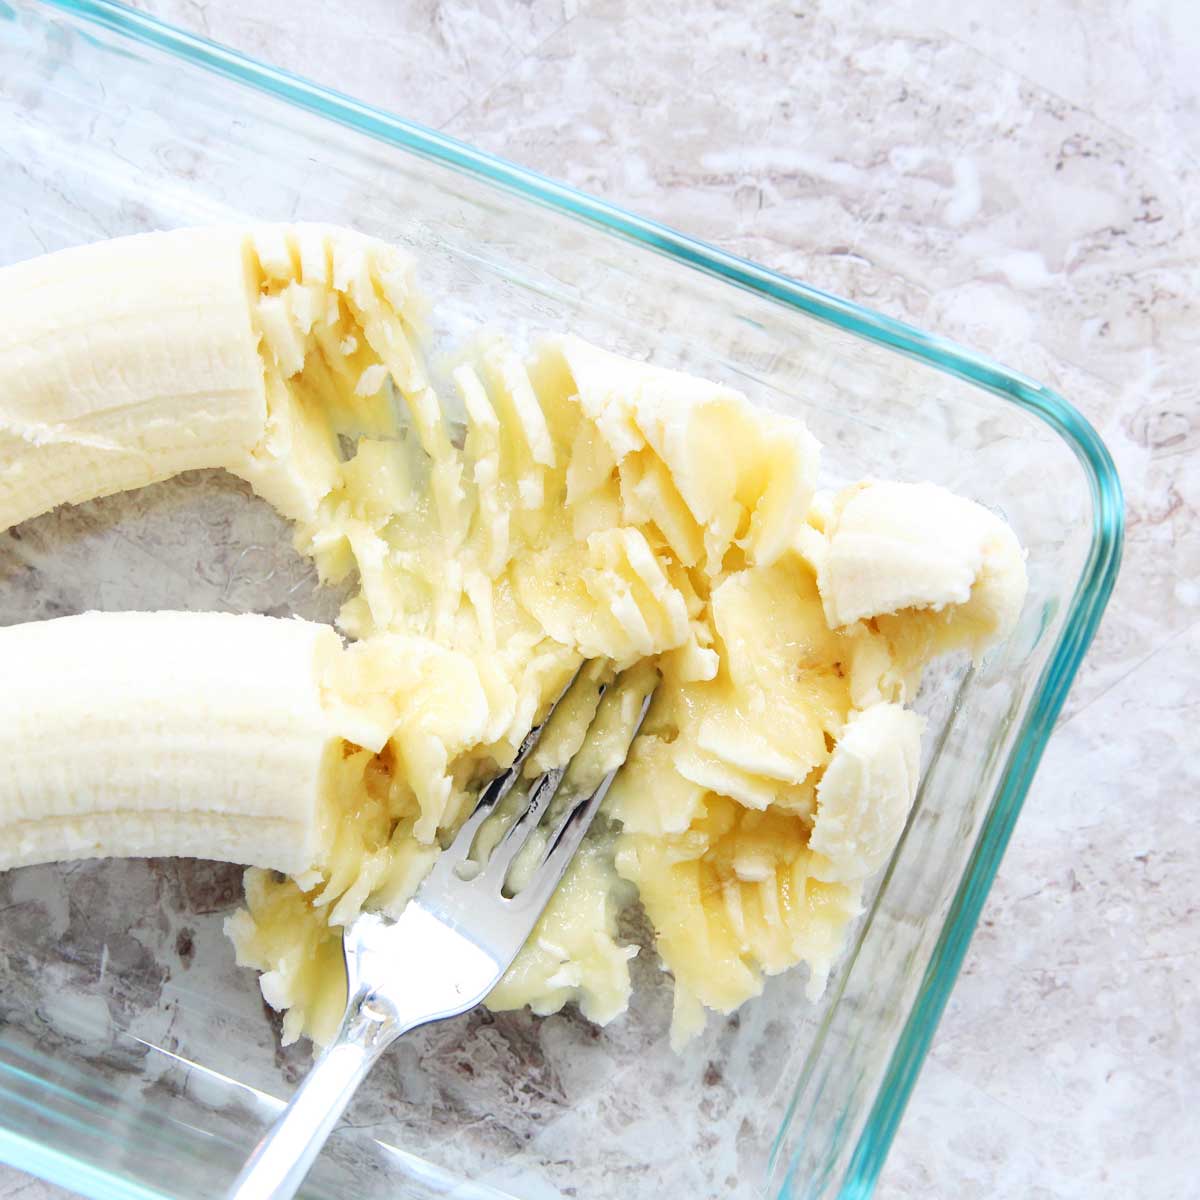 mash bananas with a large fork